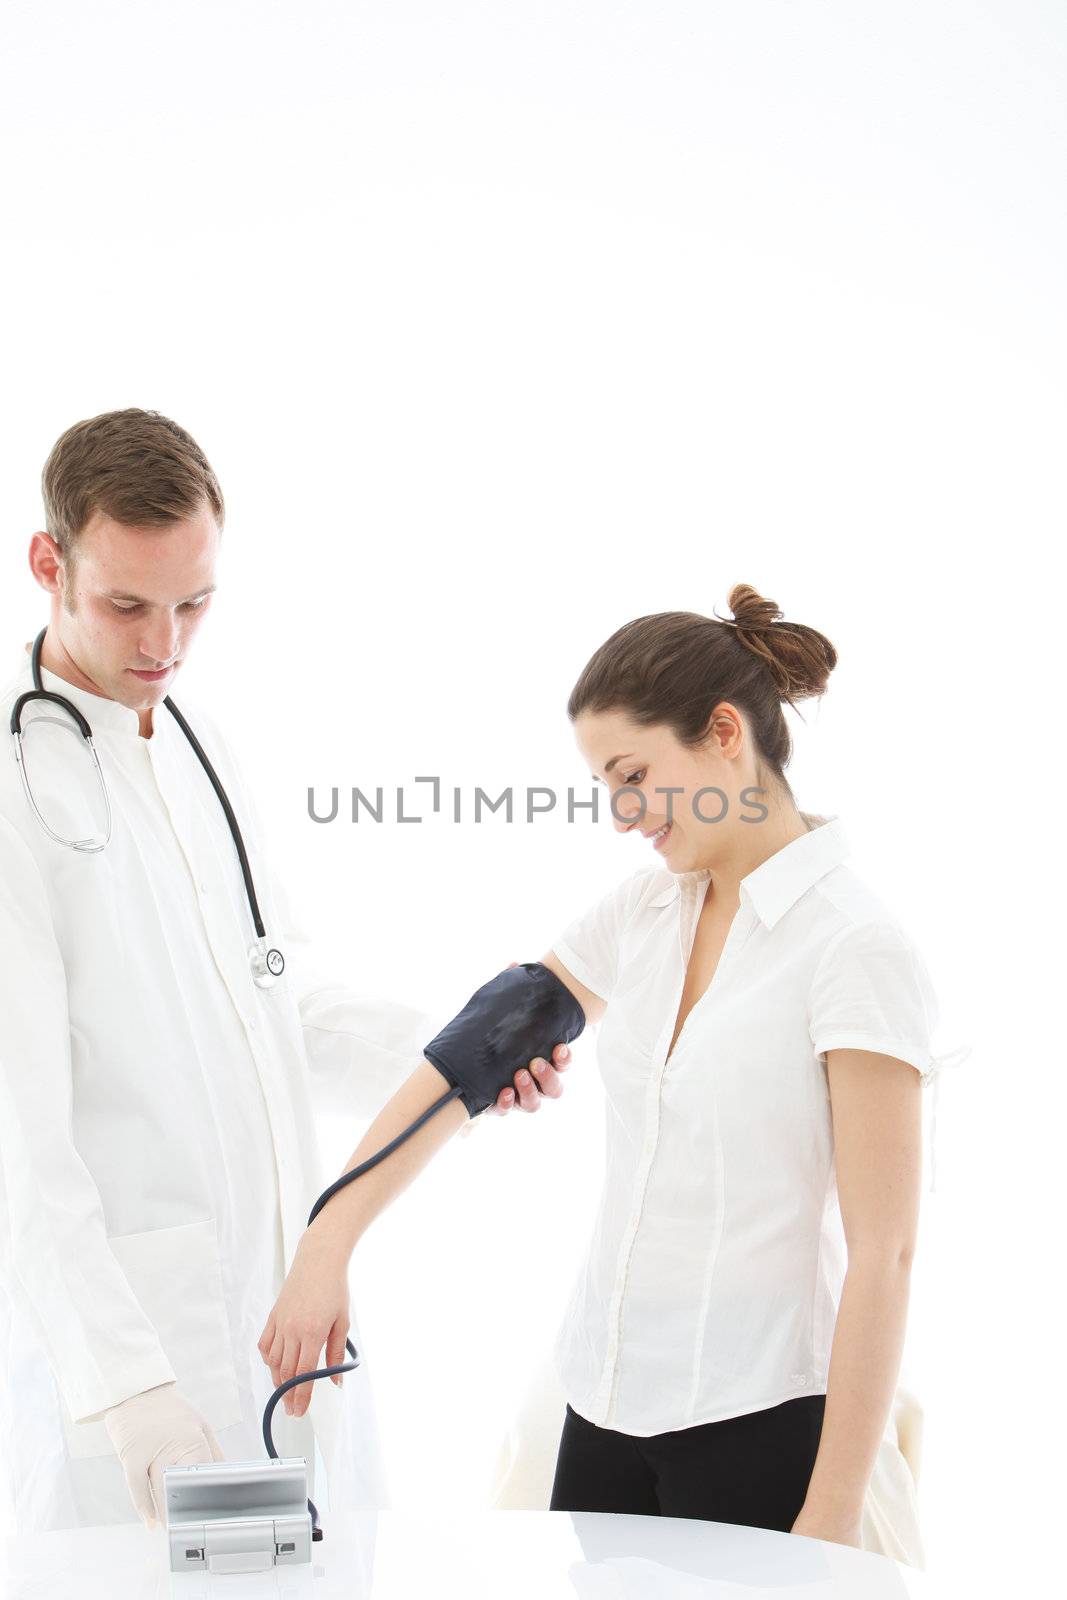 Doctor taking the blood pressure reading of a female patient using a sphygmomanometer